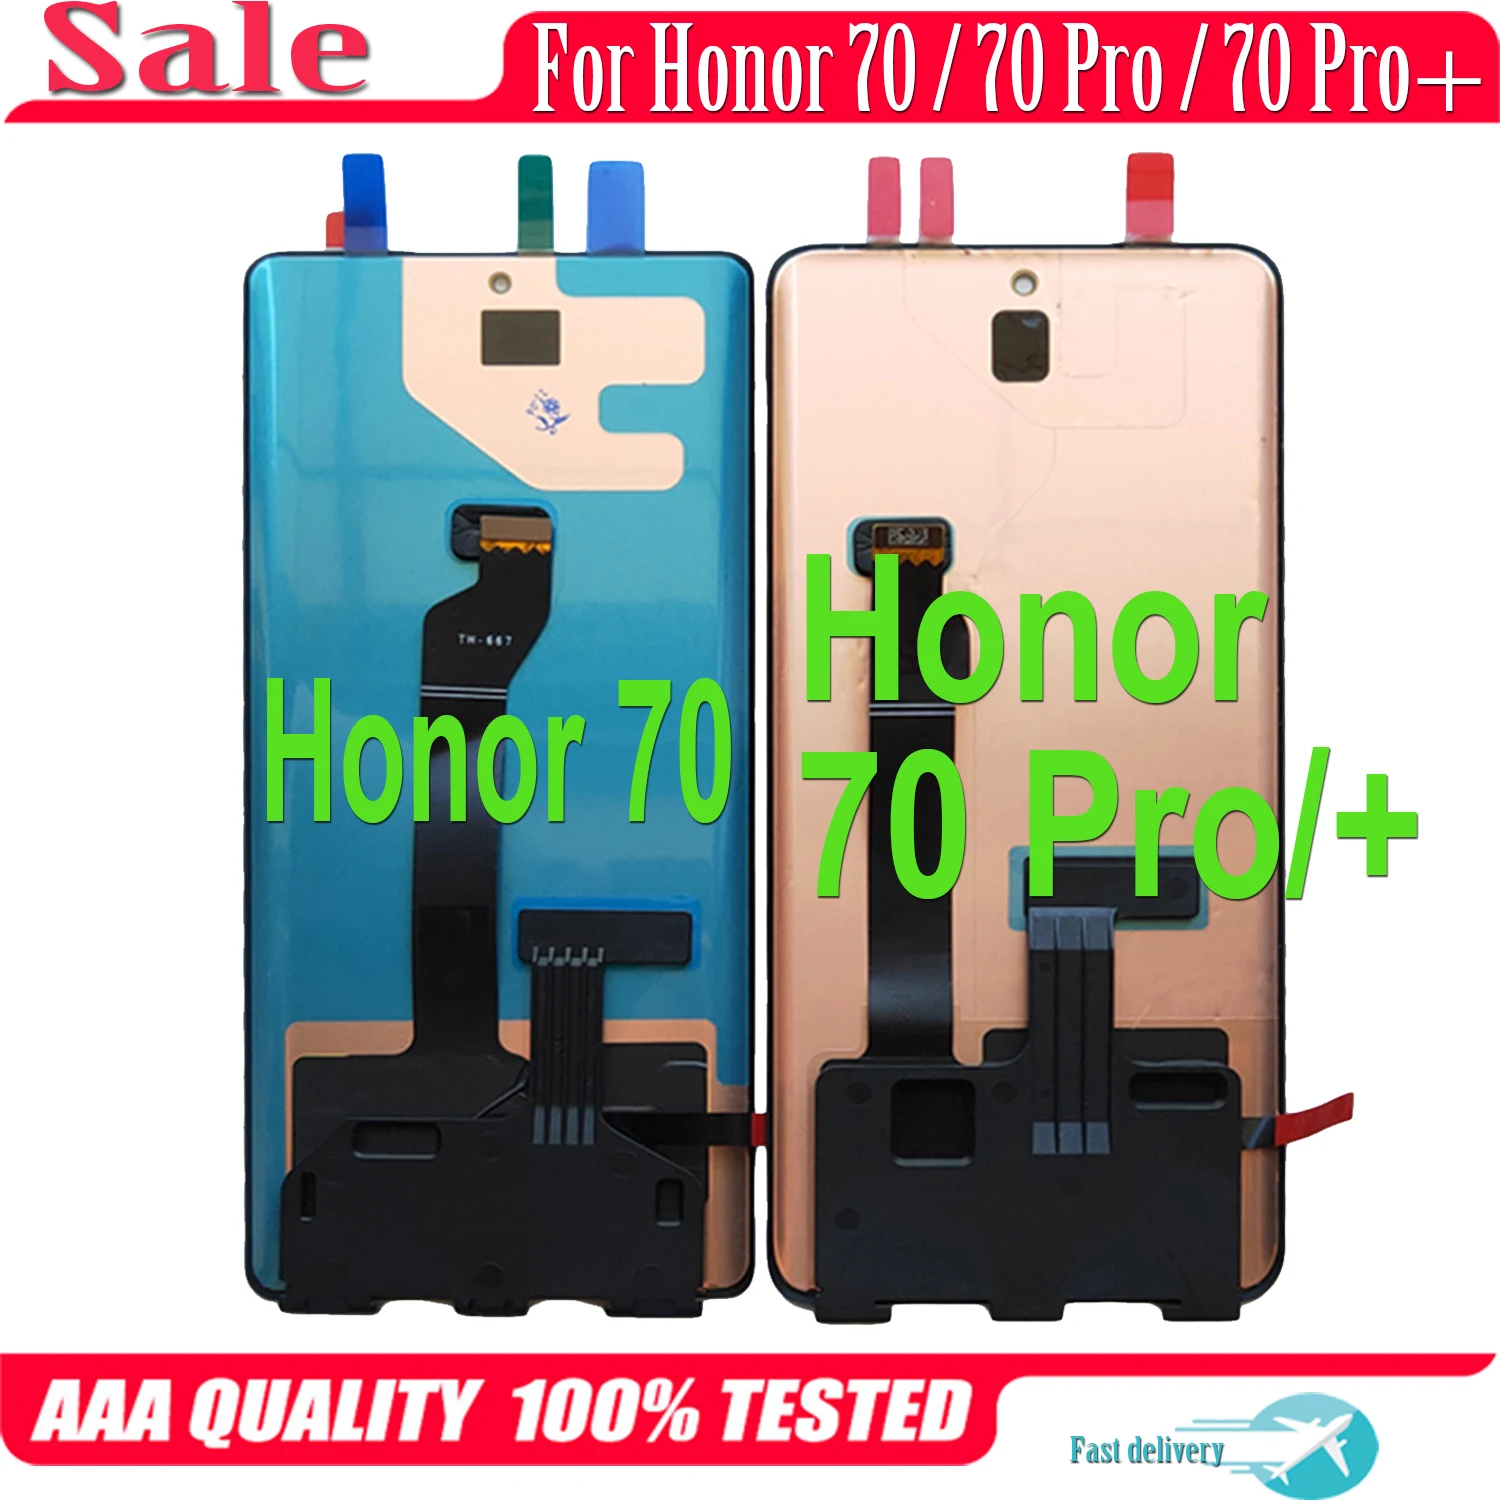 Enlarge Original For Huawei Honor 70 Pro SDY-AN00 FNE-AN00 LCD Display Touch Screen Digitizer For Honor 70 Pro+ 70 Pro Plus HPB-AN00 LCD